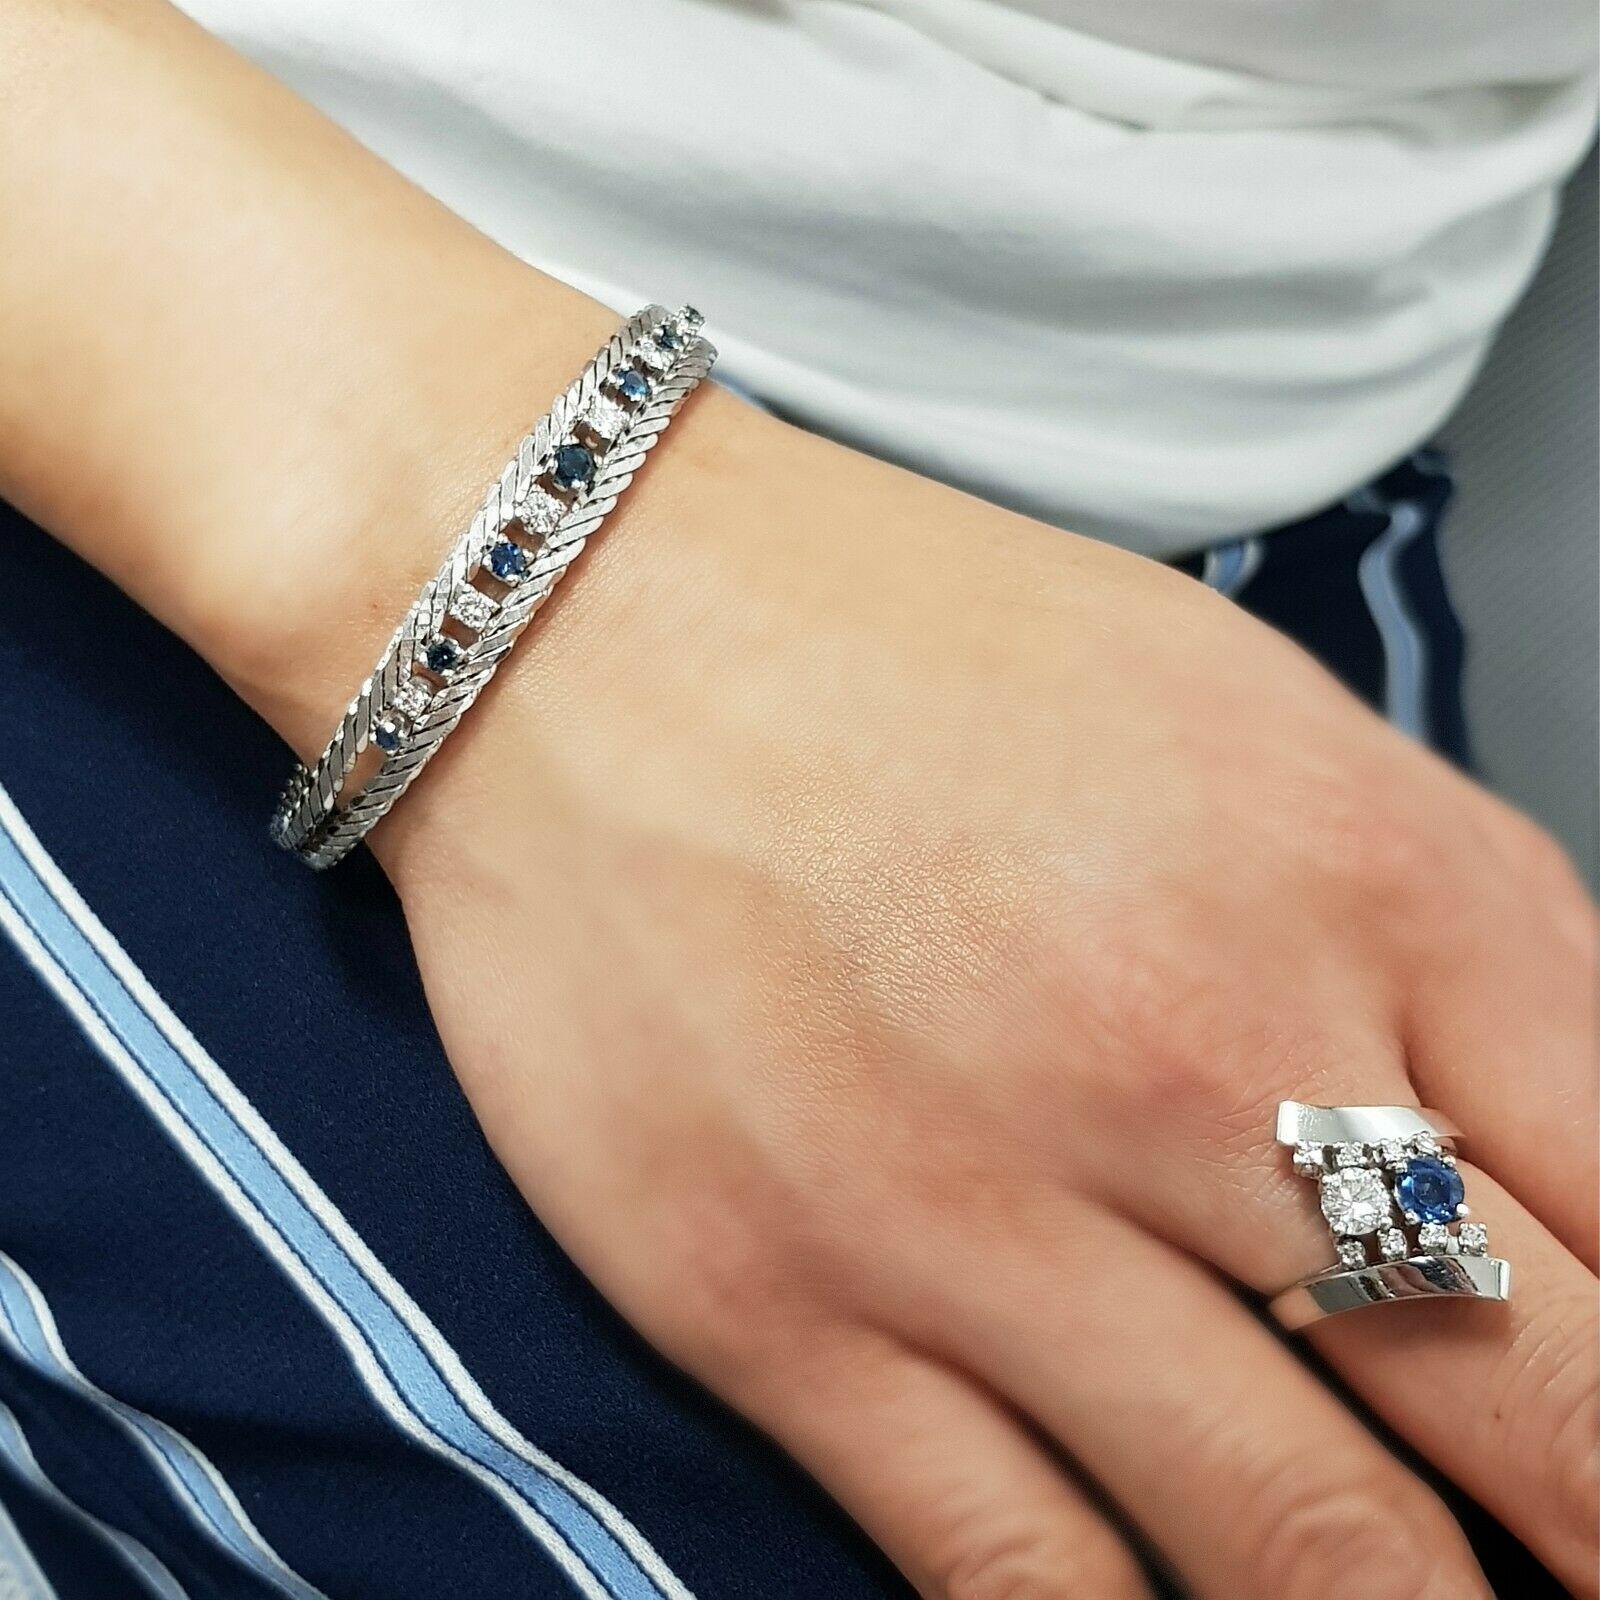  This is classic ring by H.STERN company, features 1 piece blue sapphire and 9 pieces round cut diamonds. This ring crafted in 18k white gold metal. We also have the set of necklace and rings, that can be sold separately.
Specifications:
    main